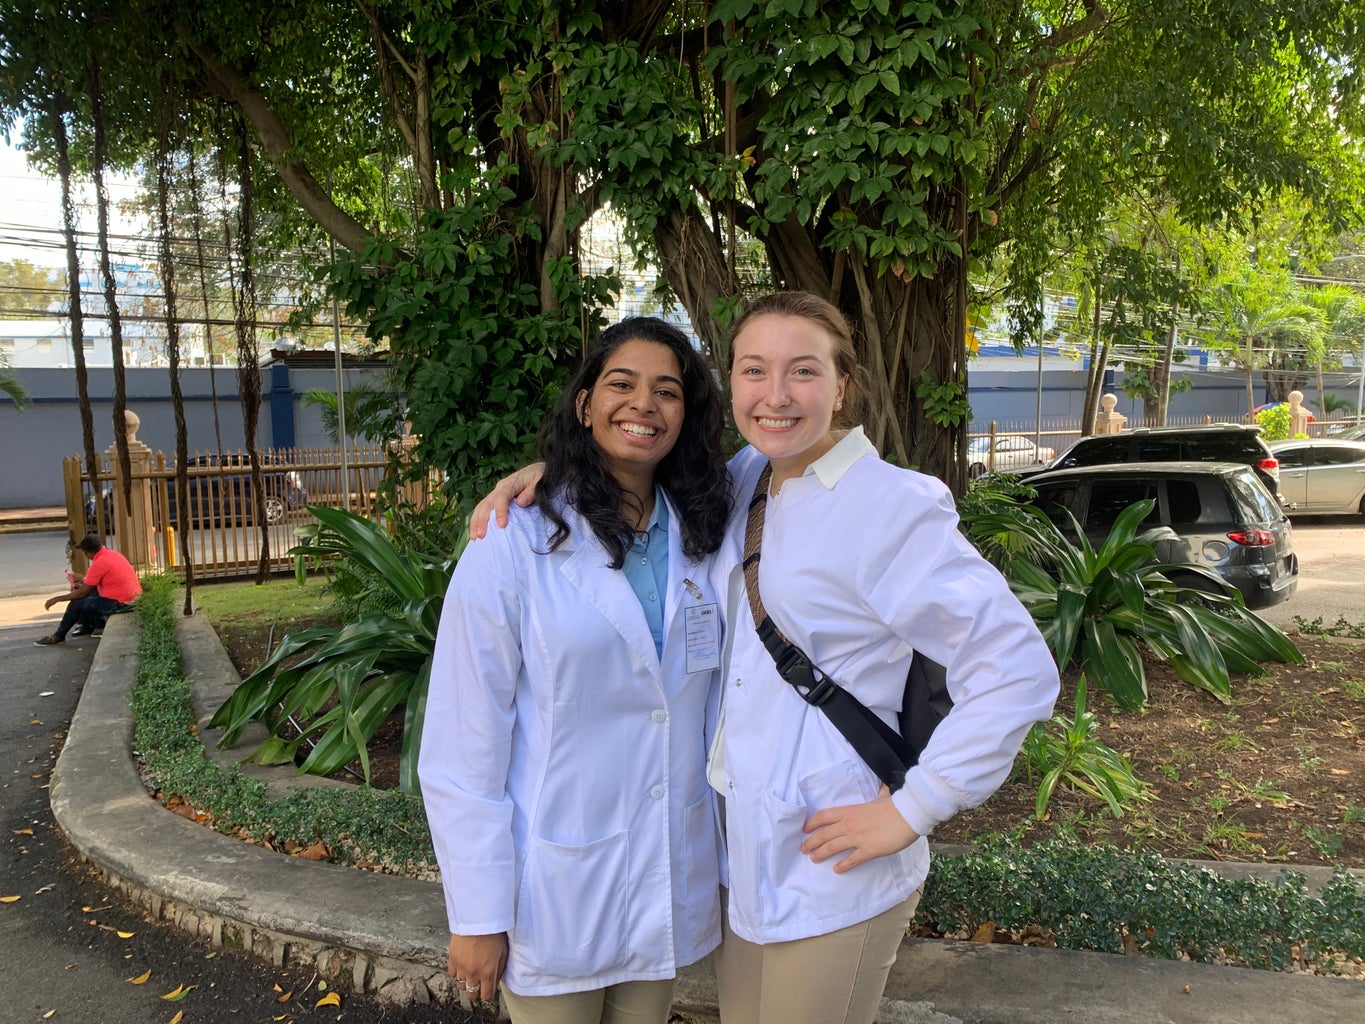 Girls with white coat outside